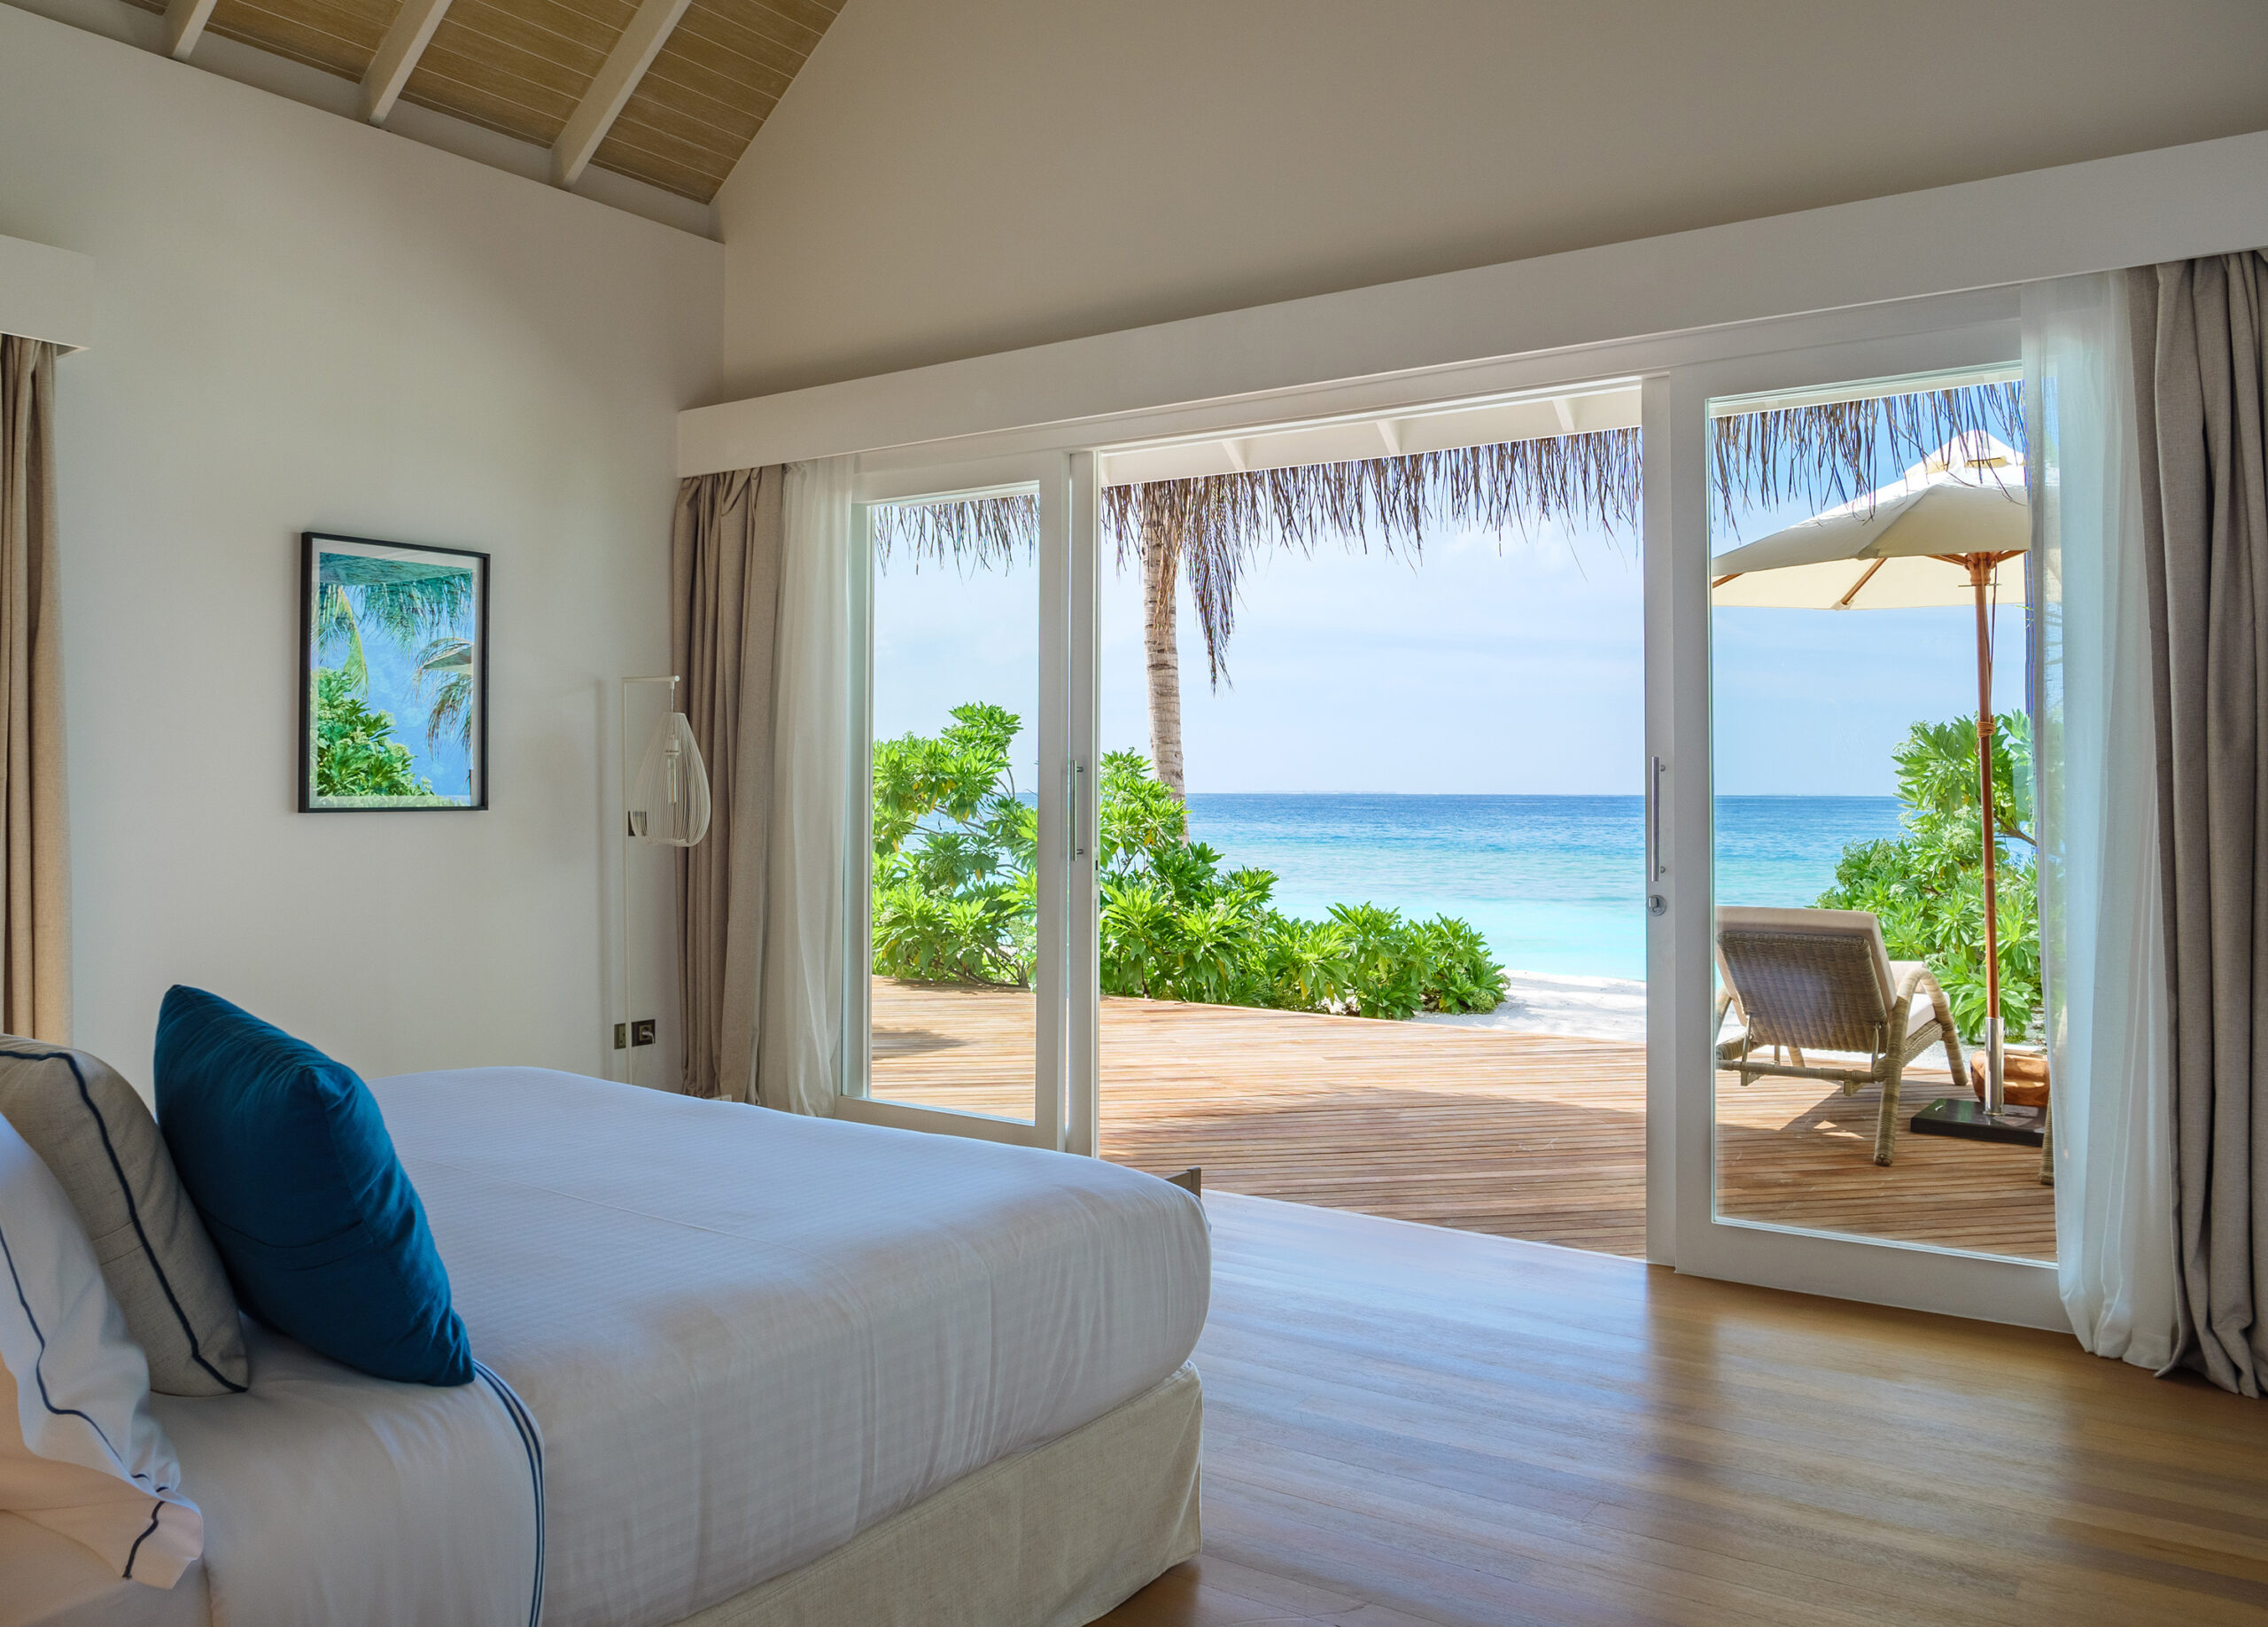 Baglioni_Resort_Maldives_Deluxe_Beach_Suite_with_pool_bedroom_02